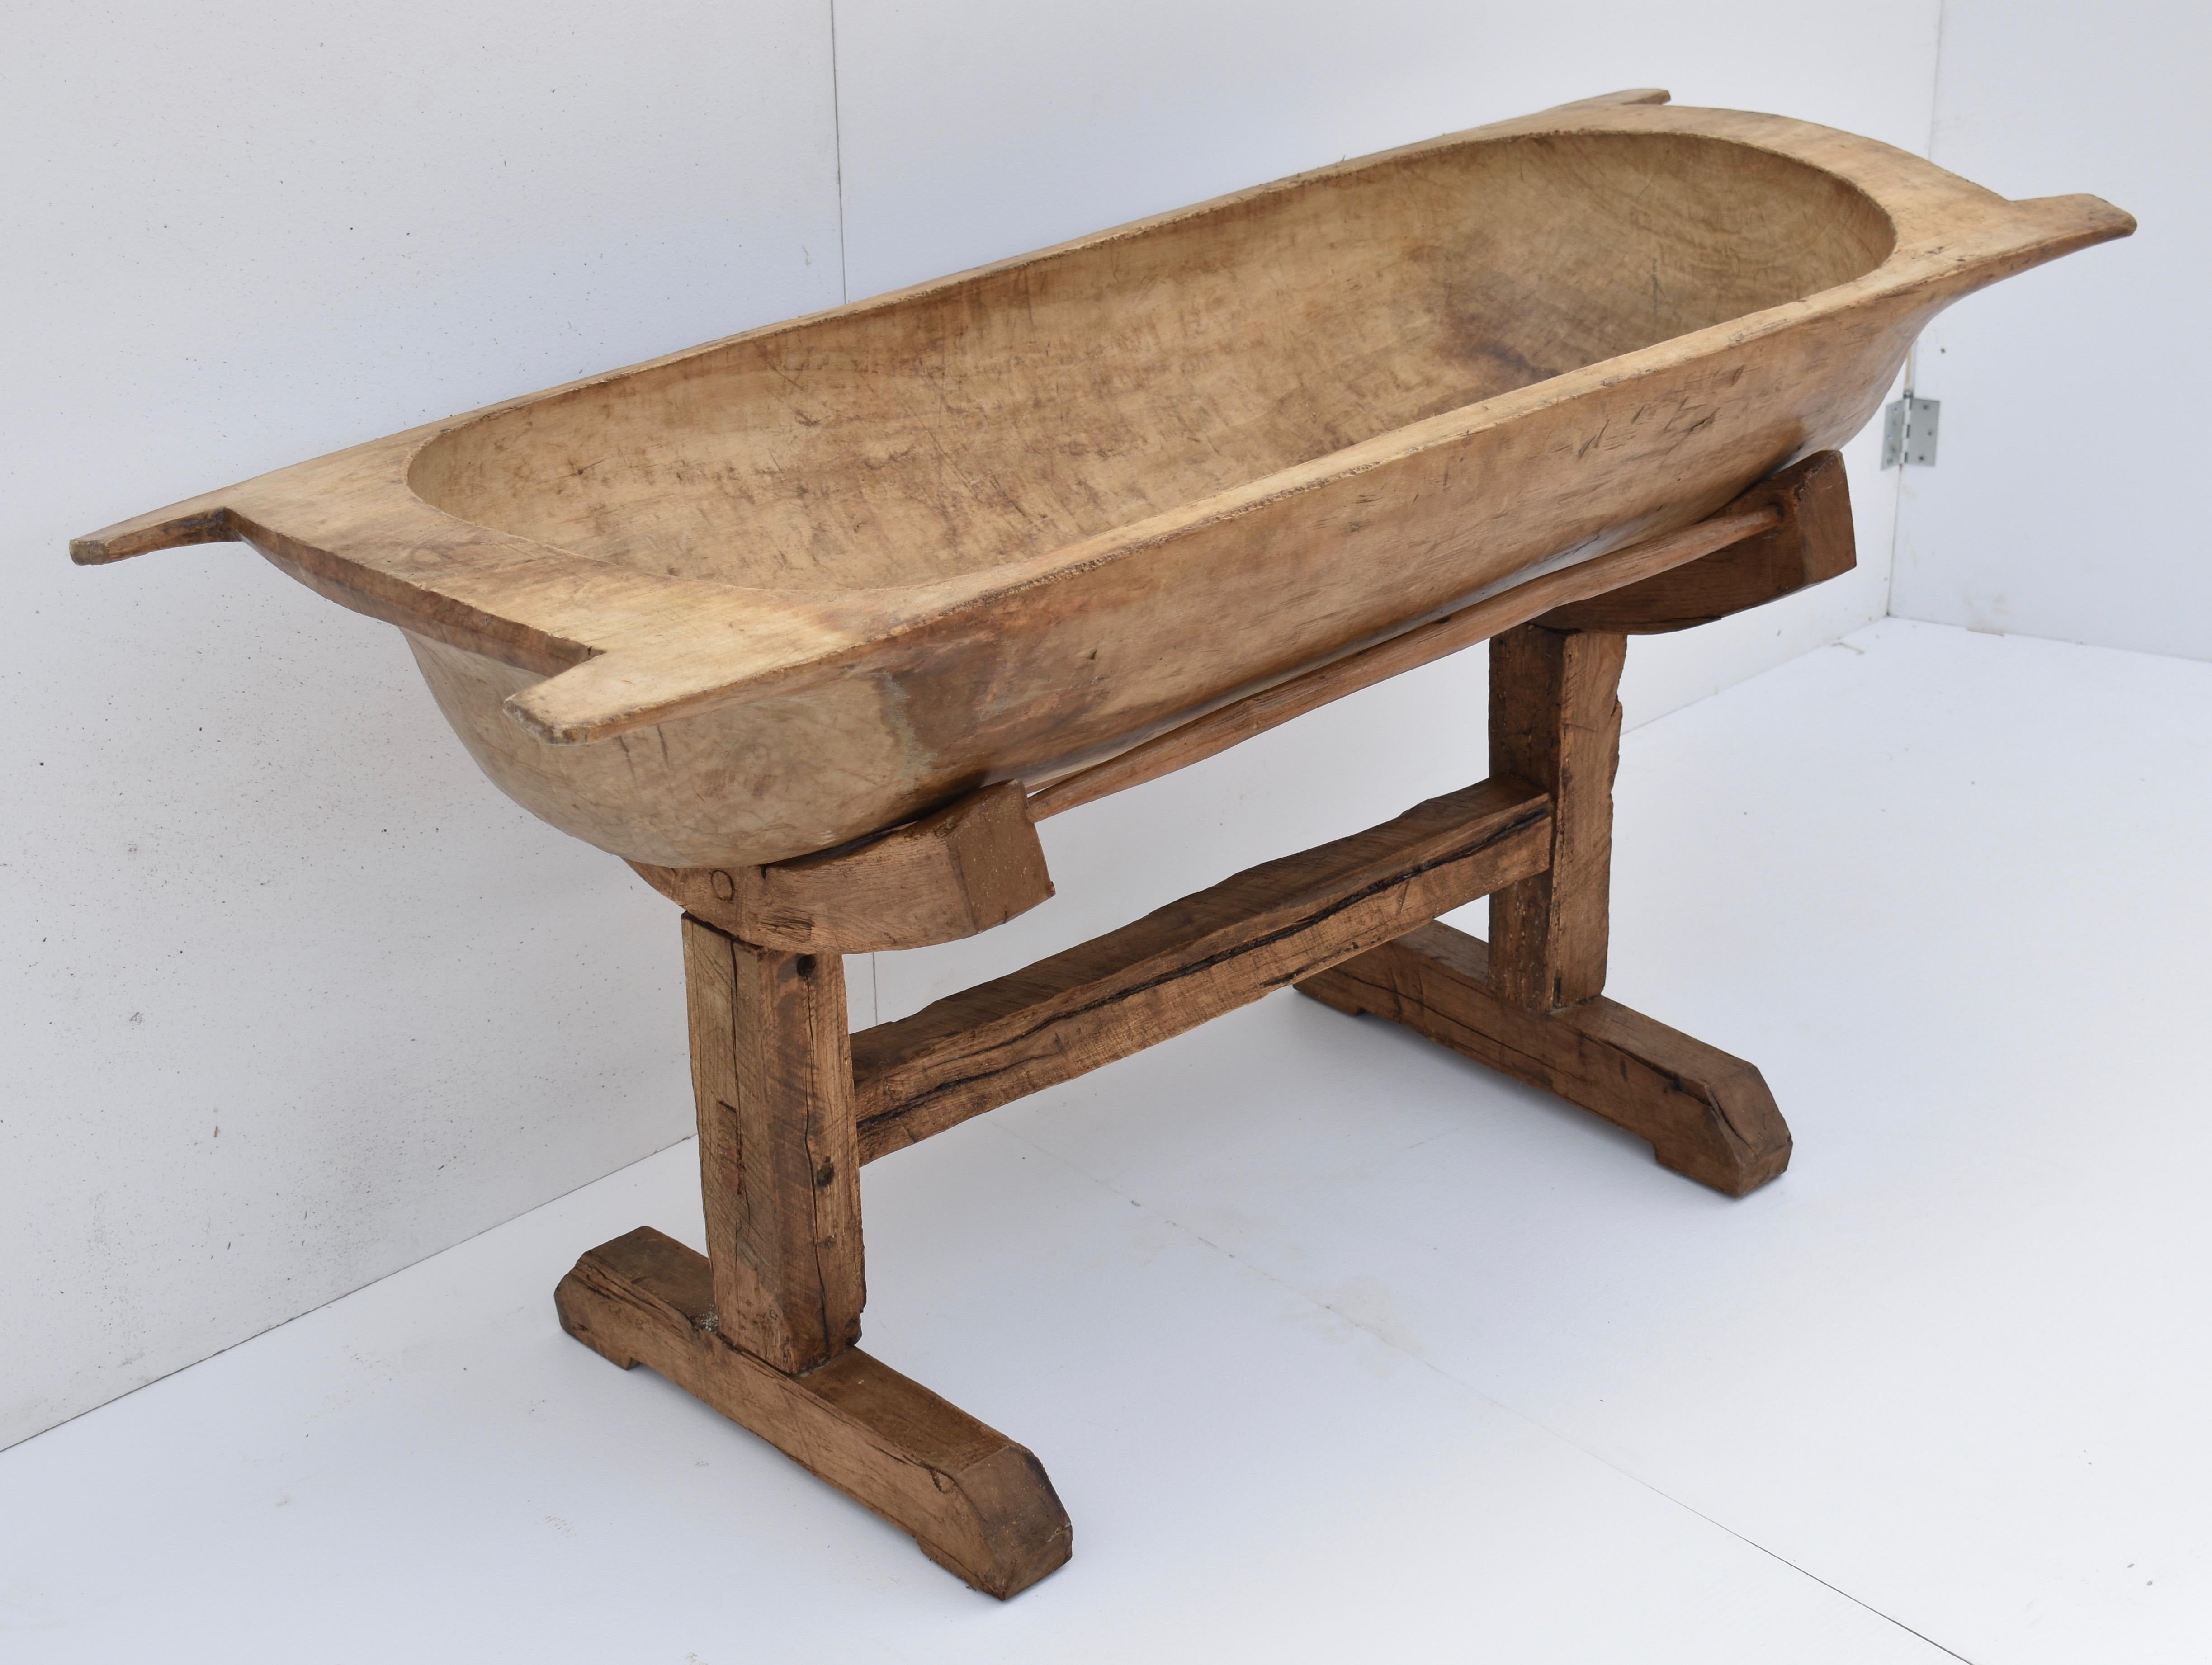 Used for kneading dough for multi-family baking or perhaps for washing the baby, this huge fruitwood trog was hand carved from a single split log. It stands nice and straight with its bottom sitting nicely in the curved supports of this stand. The